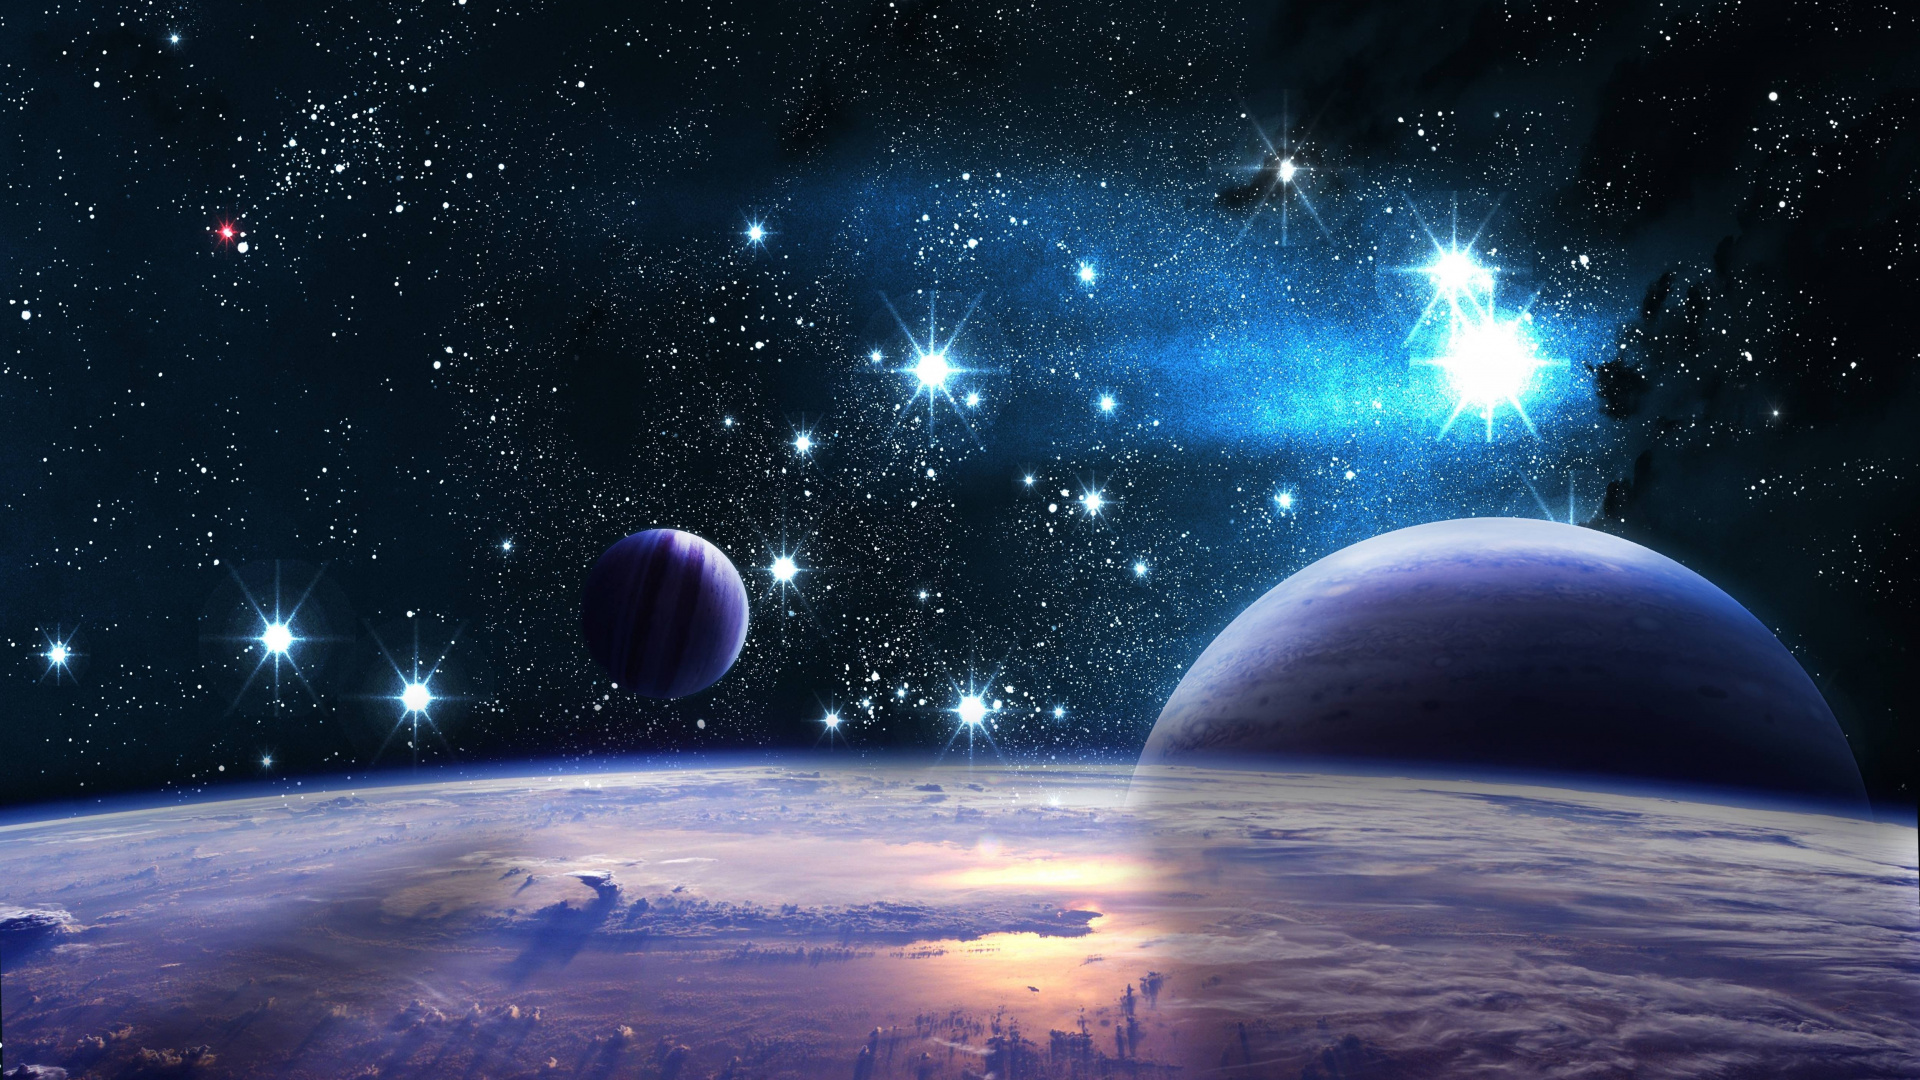 Blue and White Planet With Stars. Wallpaper in 1920x1080 Resolution